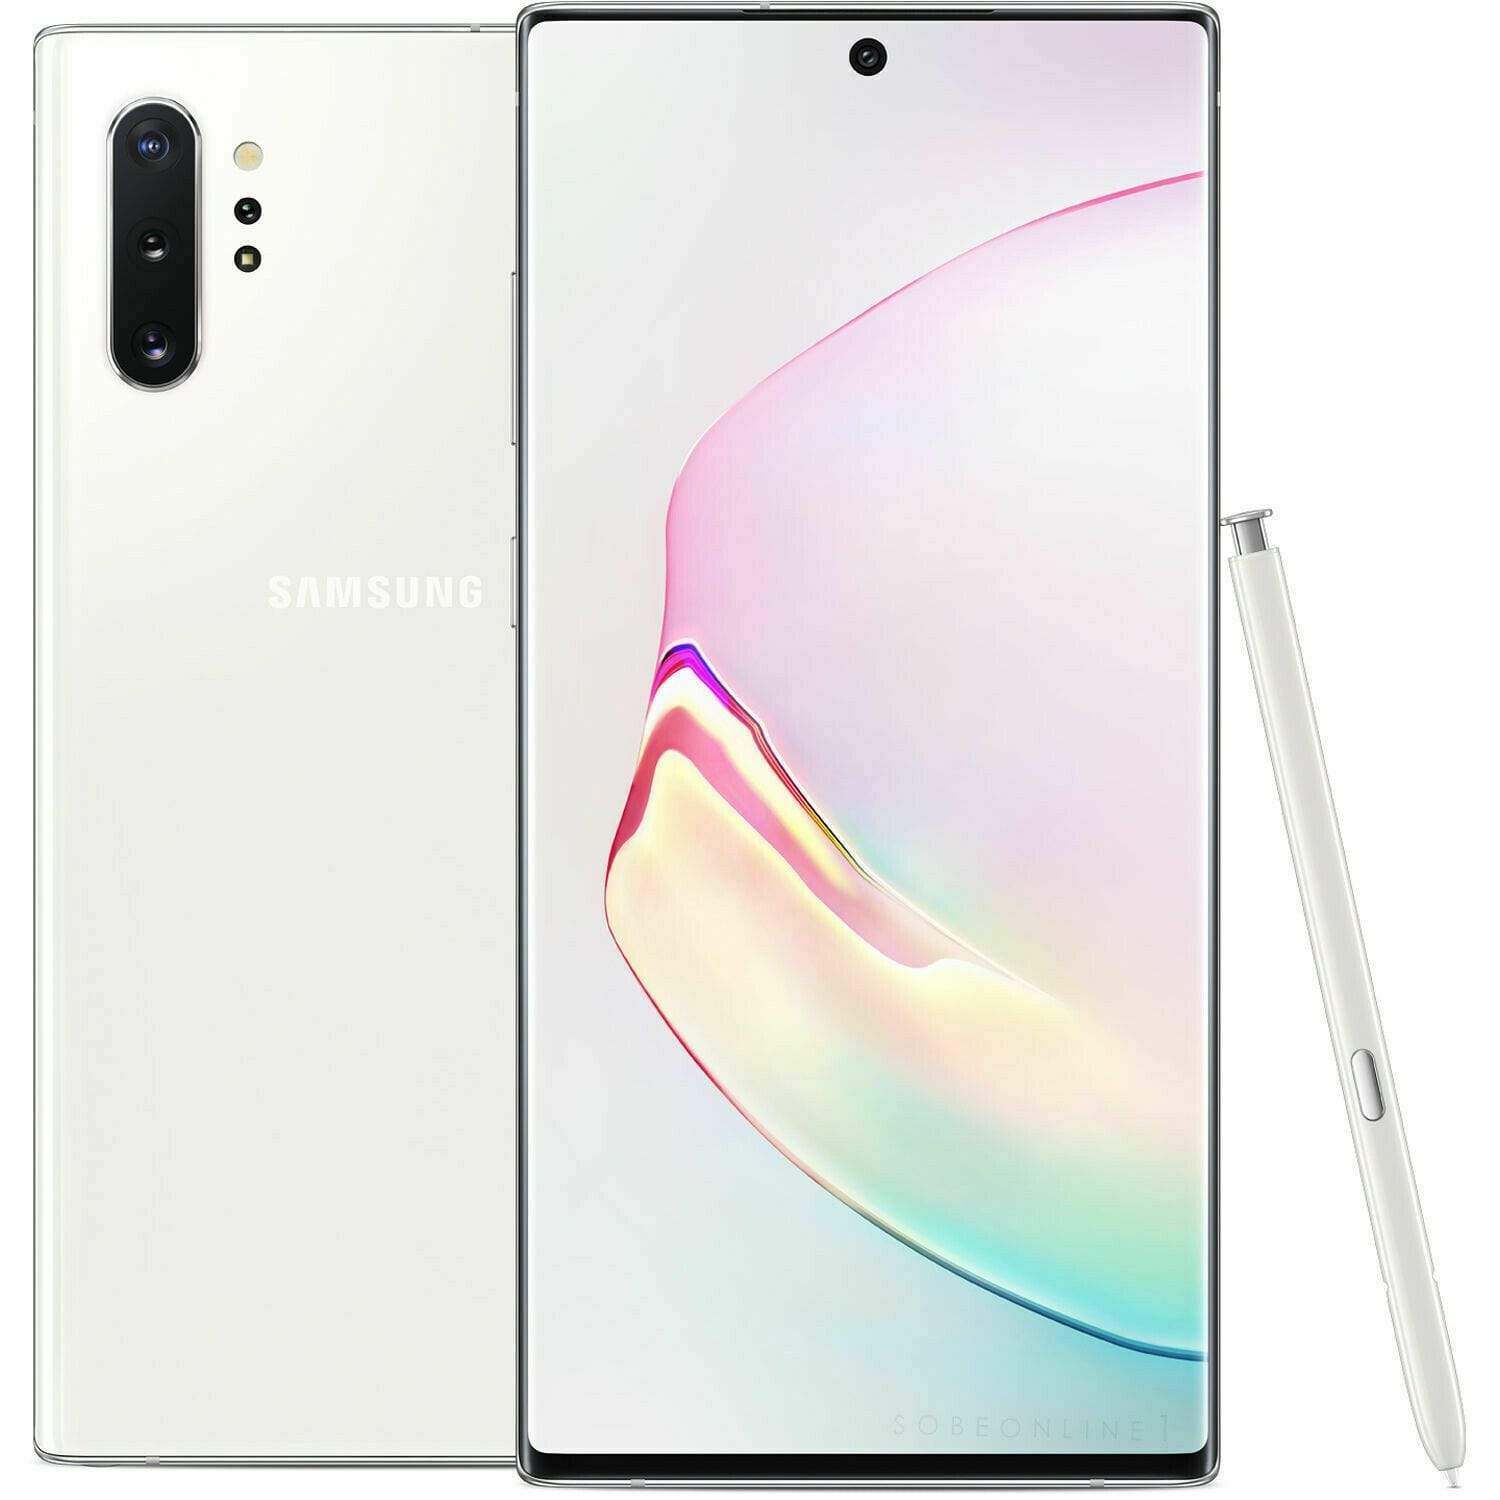 APSS - USED SAMSUNG GALAXY NOTE 10 BLACK , EXCELLENT CONDITION, 256GB,  FACTORY UNLOCKED, USB & CHARGER. $5500 CALL/ TEXT/ WHATSAPP 710-8058 WE  BUY/ SELL / TRADE